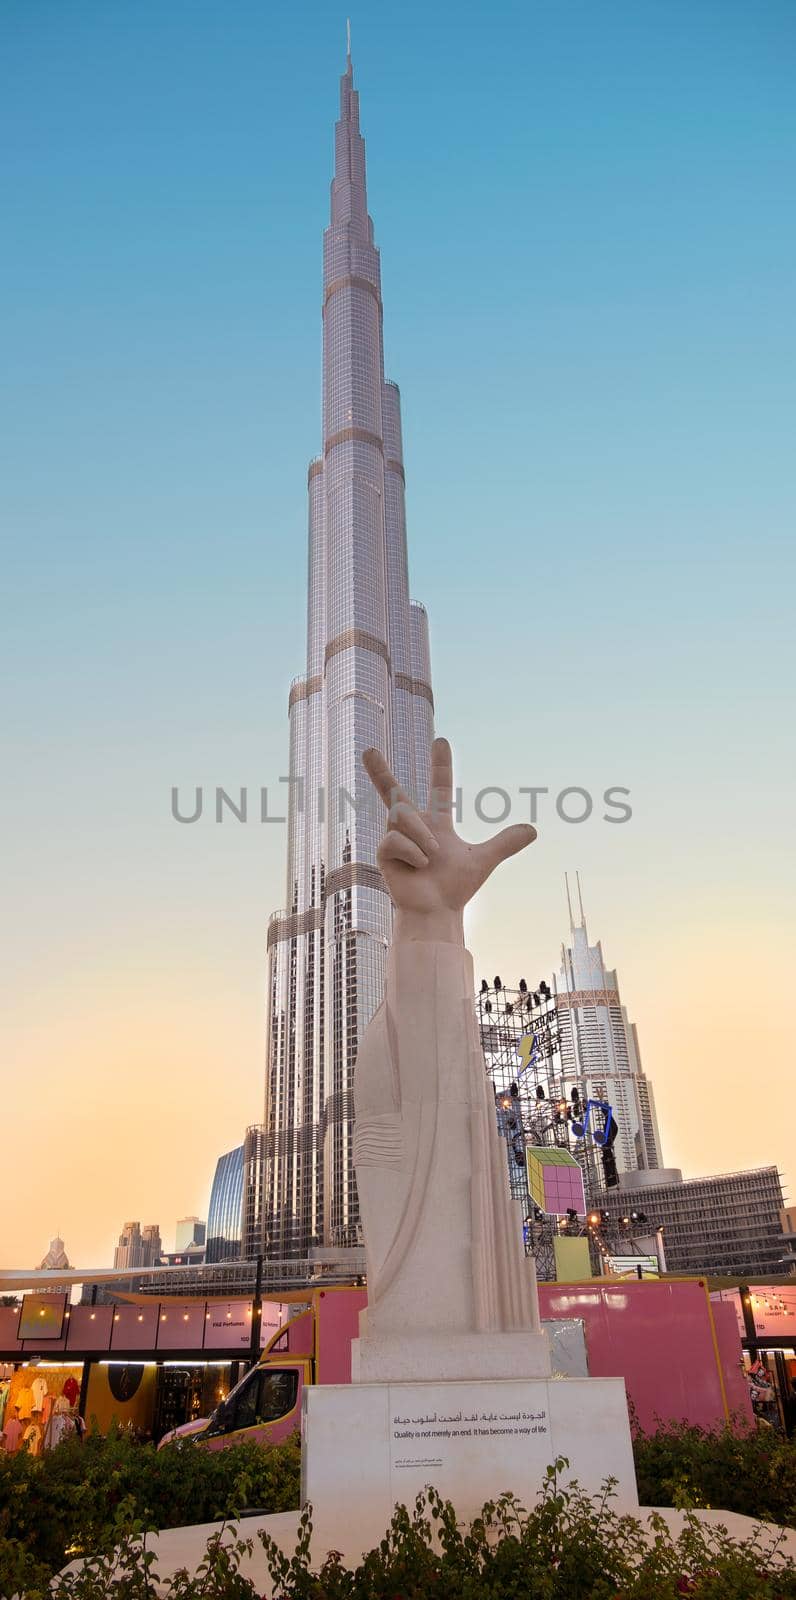 JAN 7th 2021, DUBAI, UAE. Statue of a hand showing victory symbol with the Burj Khalifa at the background captured at the recreational etisalat dsf market , the burj park, Dubai,Uae. by sriyapixels